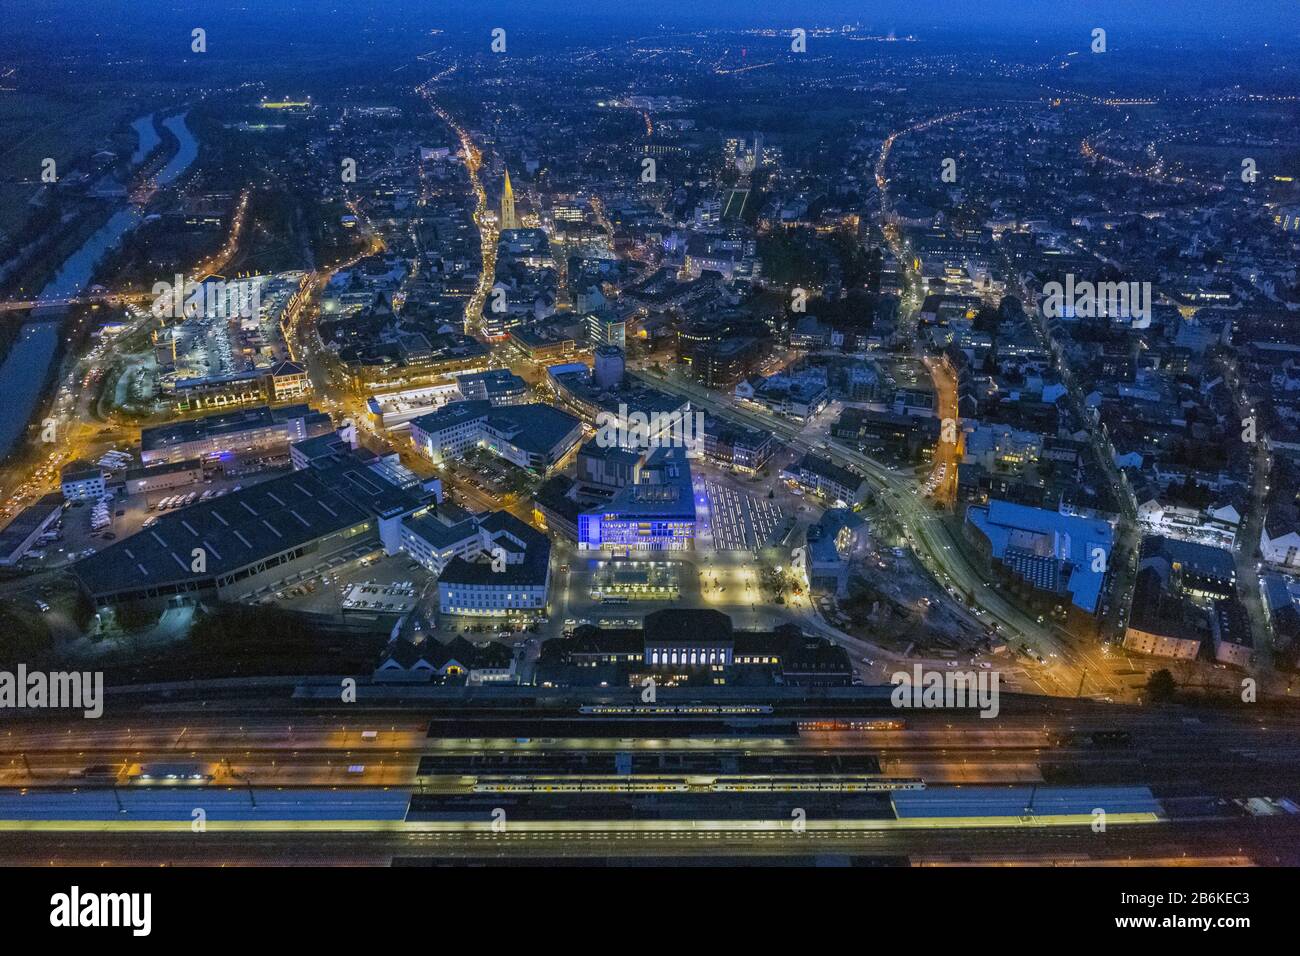 Night view of the city centre of Hamm with main station and Heinrich von Kleist Forum, 17.12.2013, aerial view, Germany, North Rhine-Westphalia, Ruhr Area, Hamm Stock Photo